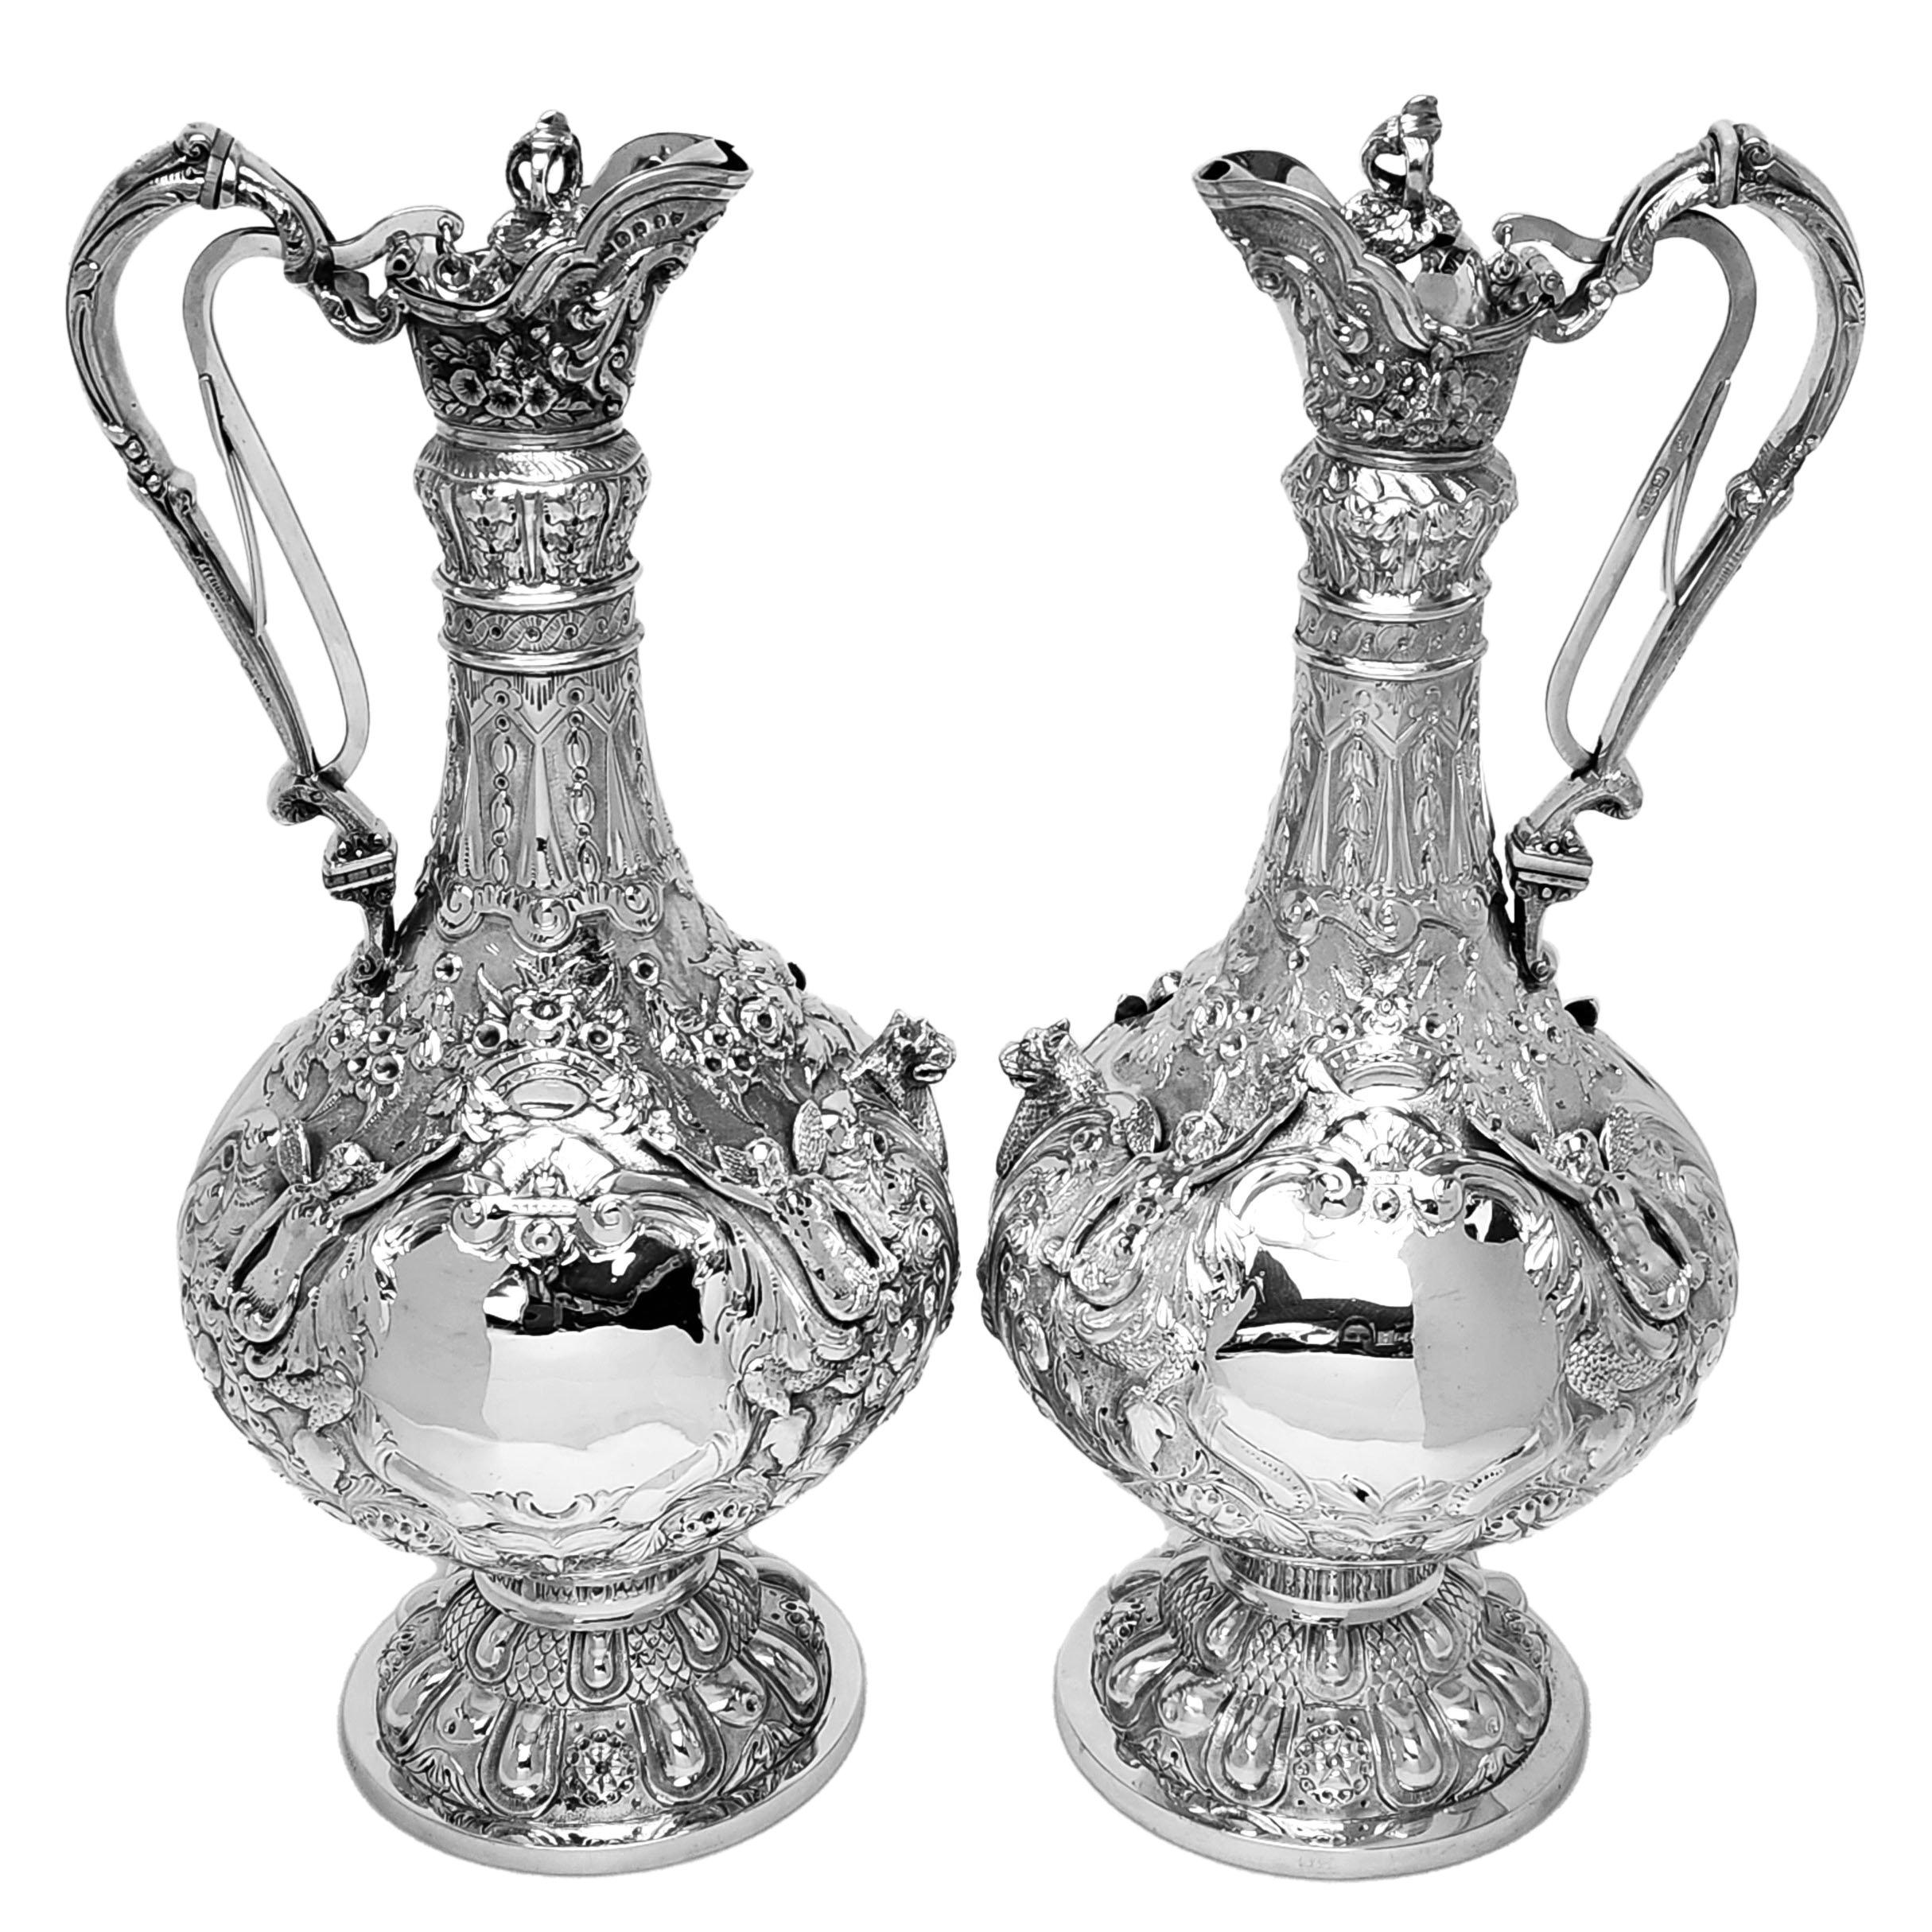 An impressive pair of Antique Irish sterling silver Claret jugs in a traditional Armada Style. This Pair of Armada Wine Ewers feature rich and ornate chased and applied detailing over the entire body of the jug. These chased decorative elements